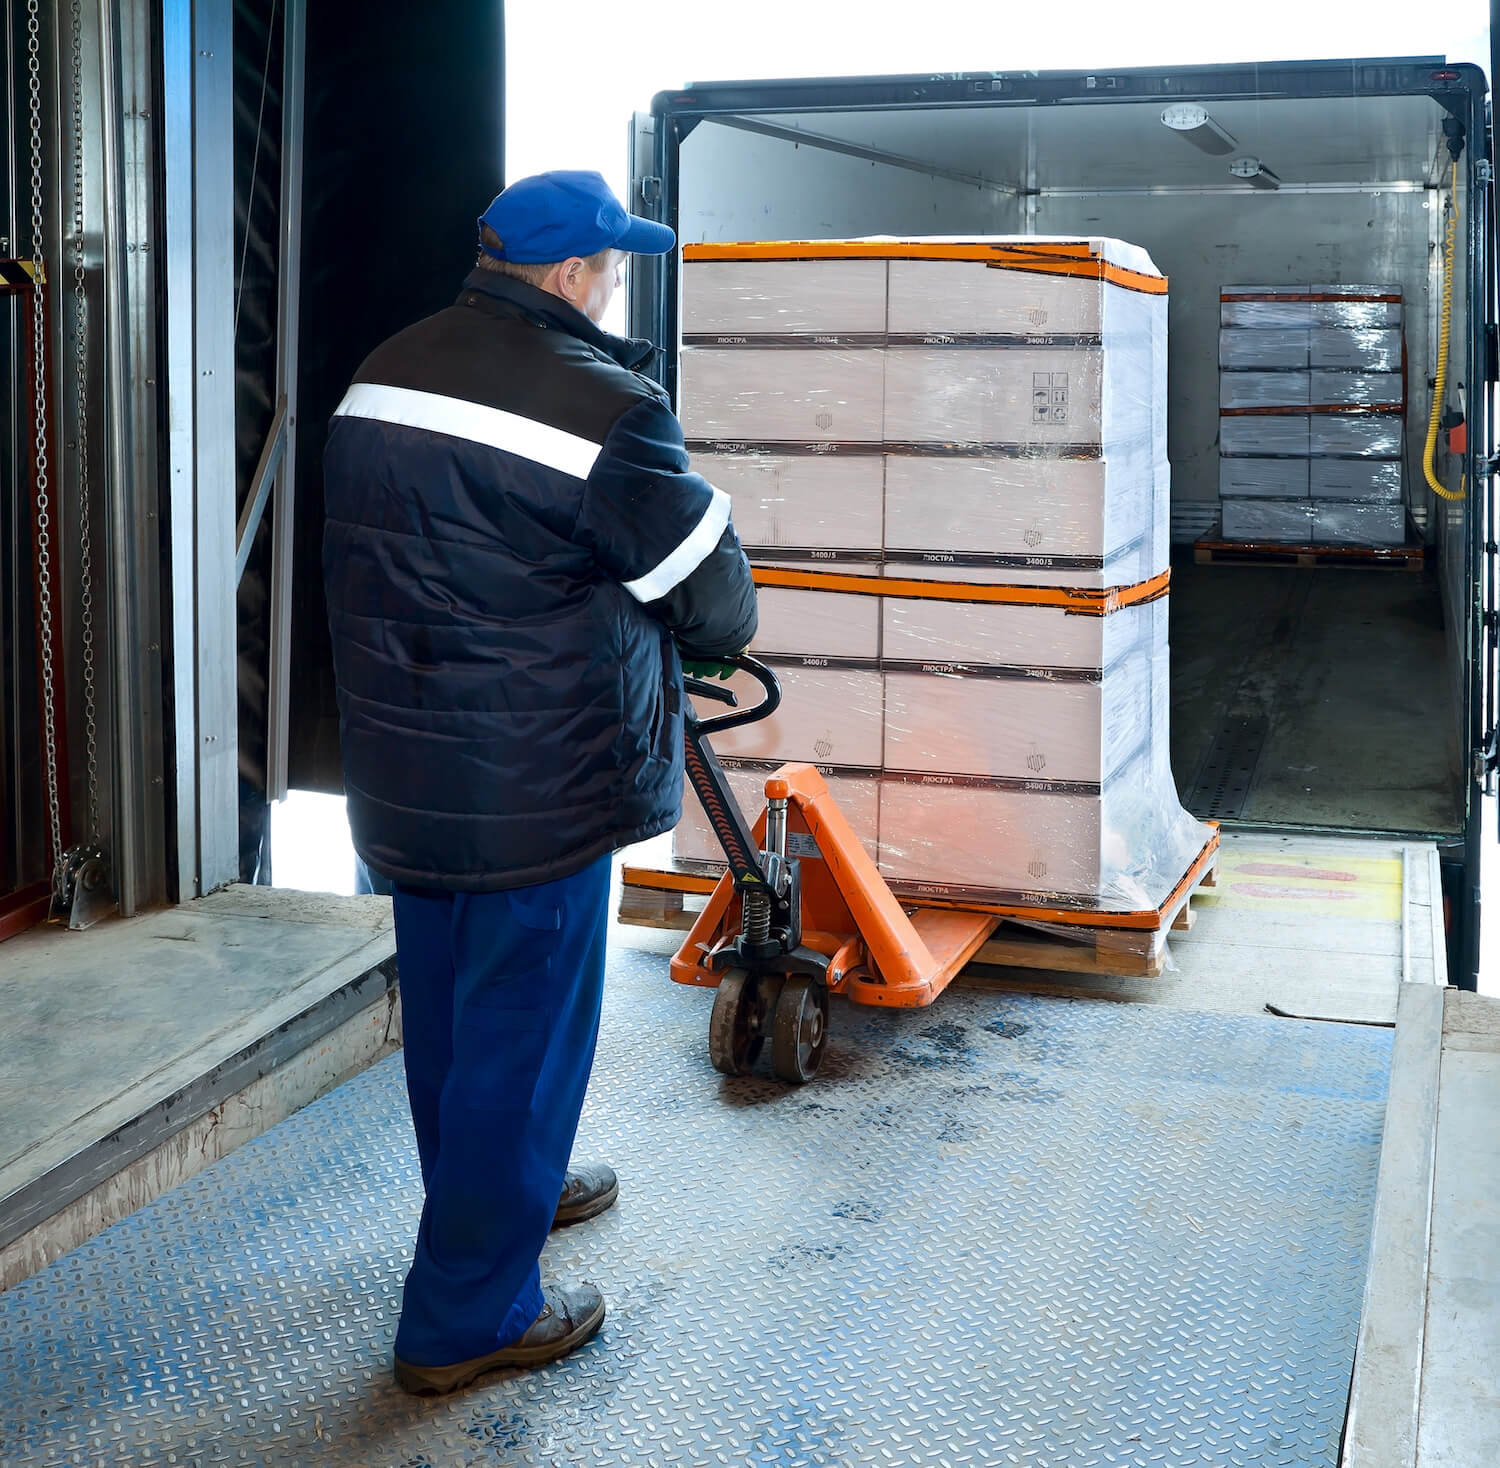 Cargo worker moving packages to truck